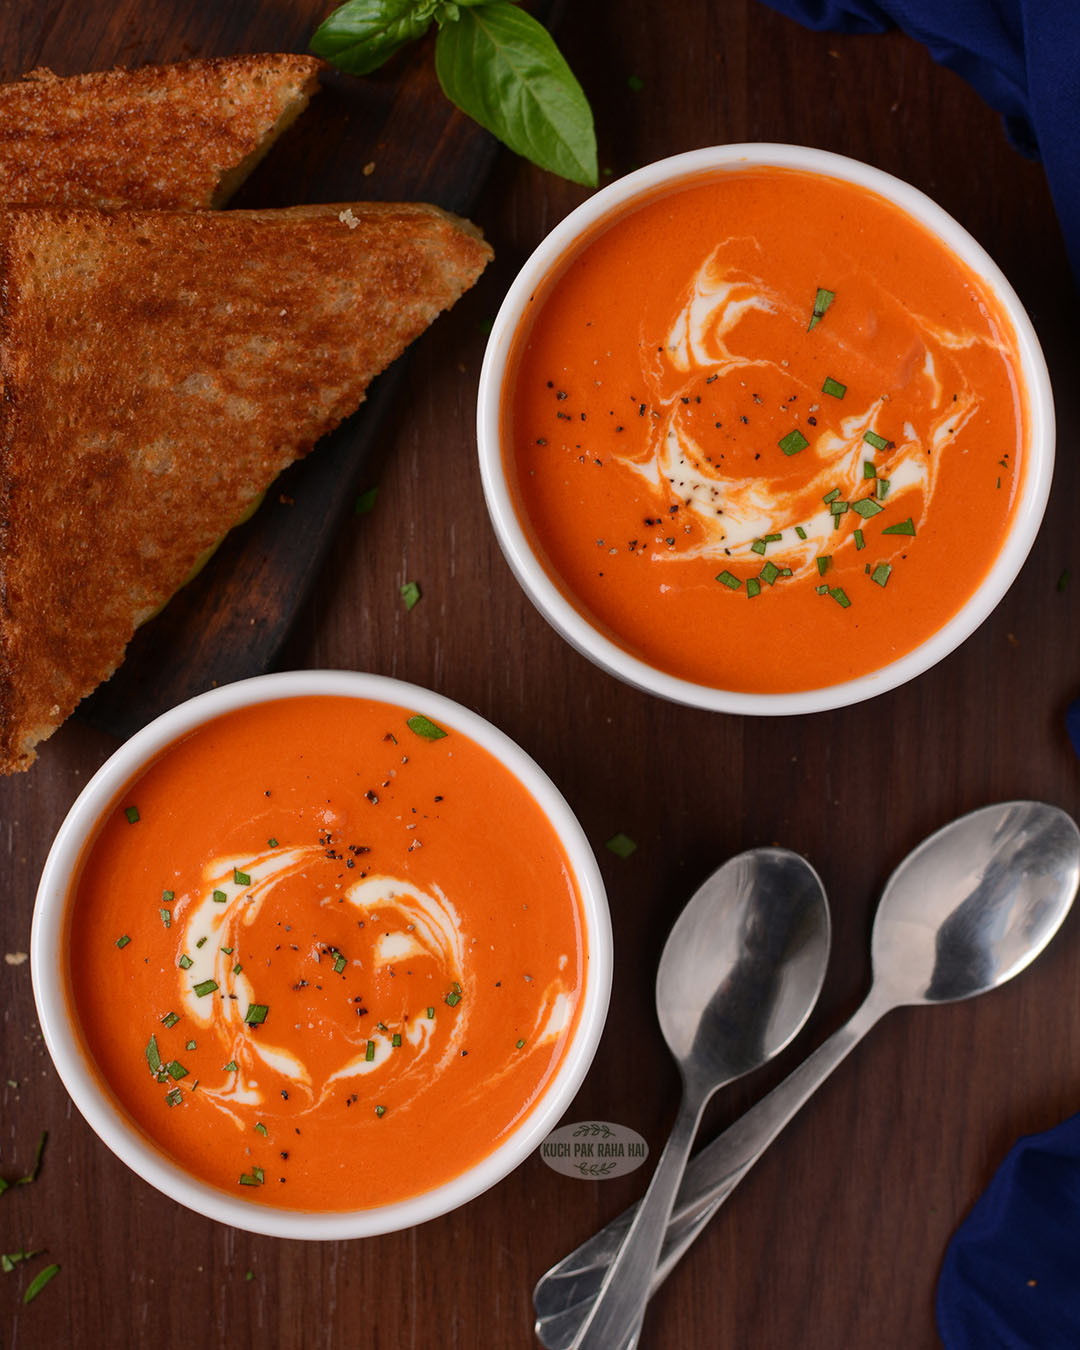 Roasted tomato and garlic soup.